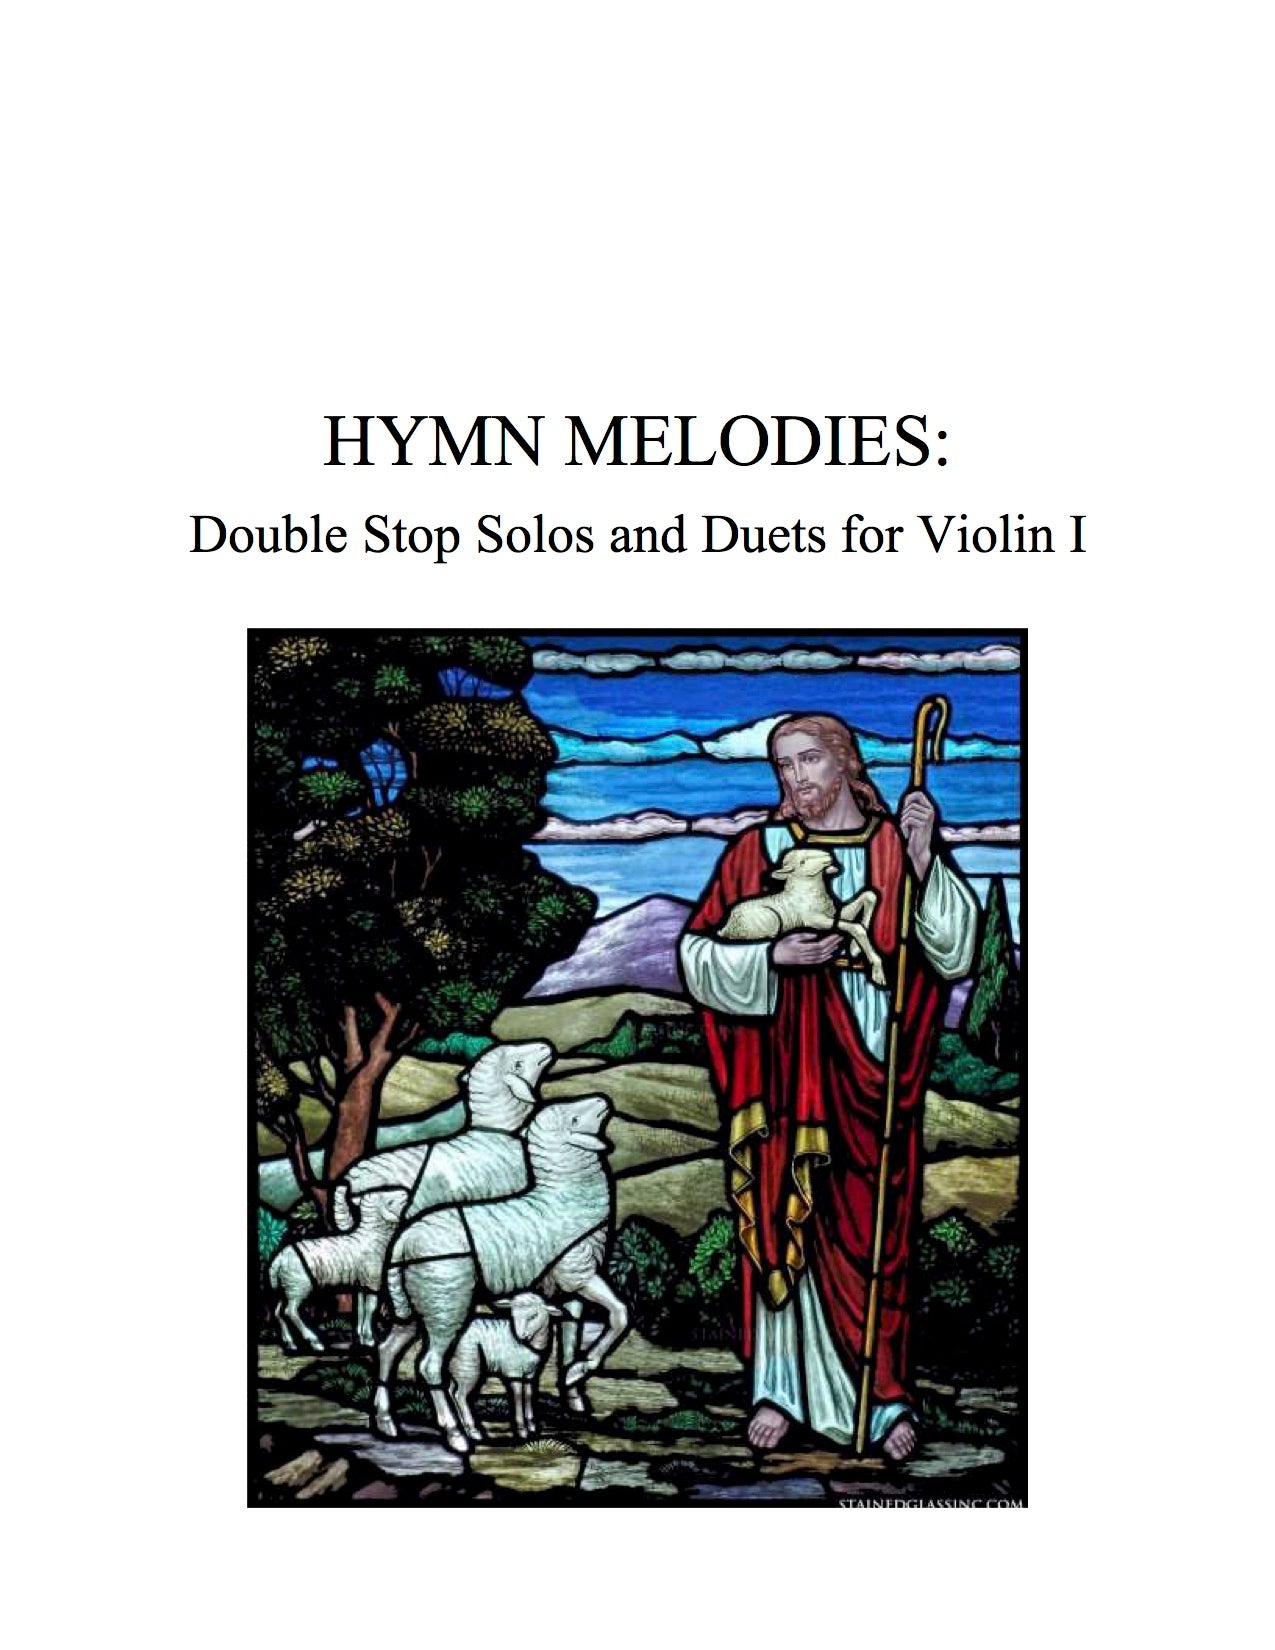 070 Hymn Melodies: Double Stop Solos and Duets For Violin, Volume I